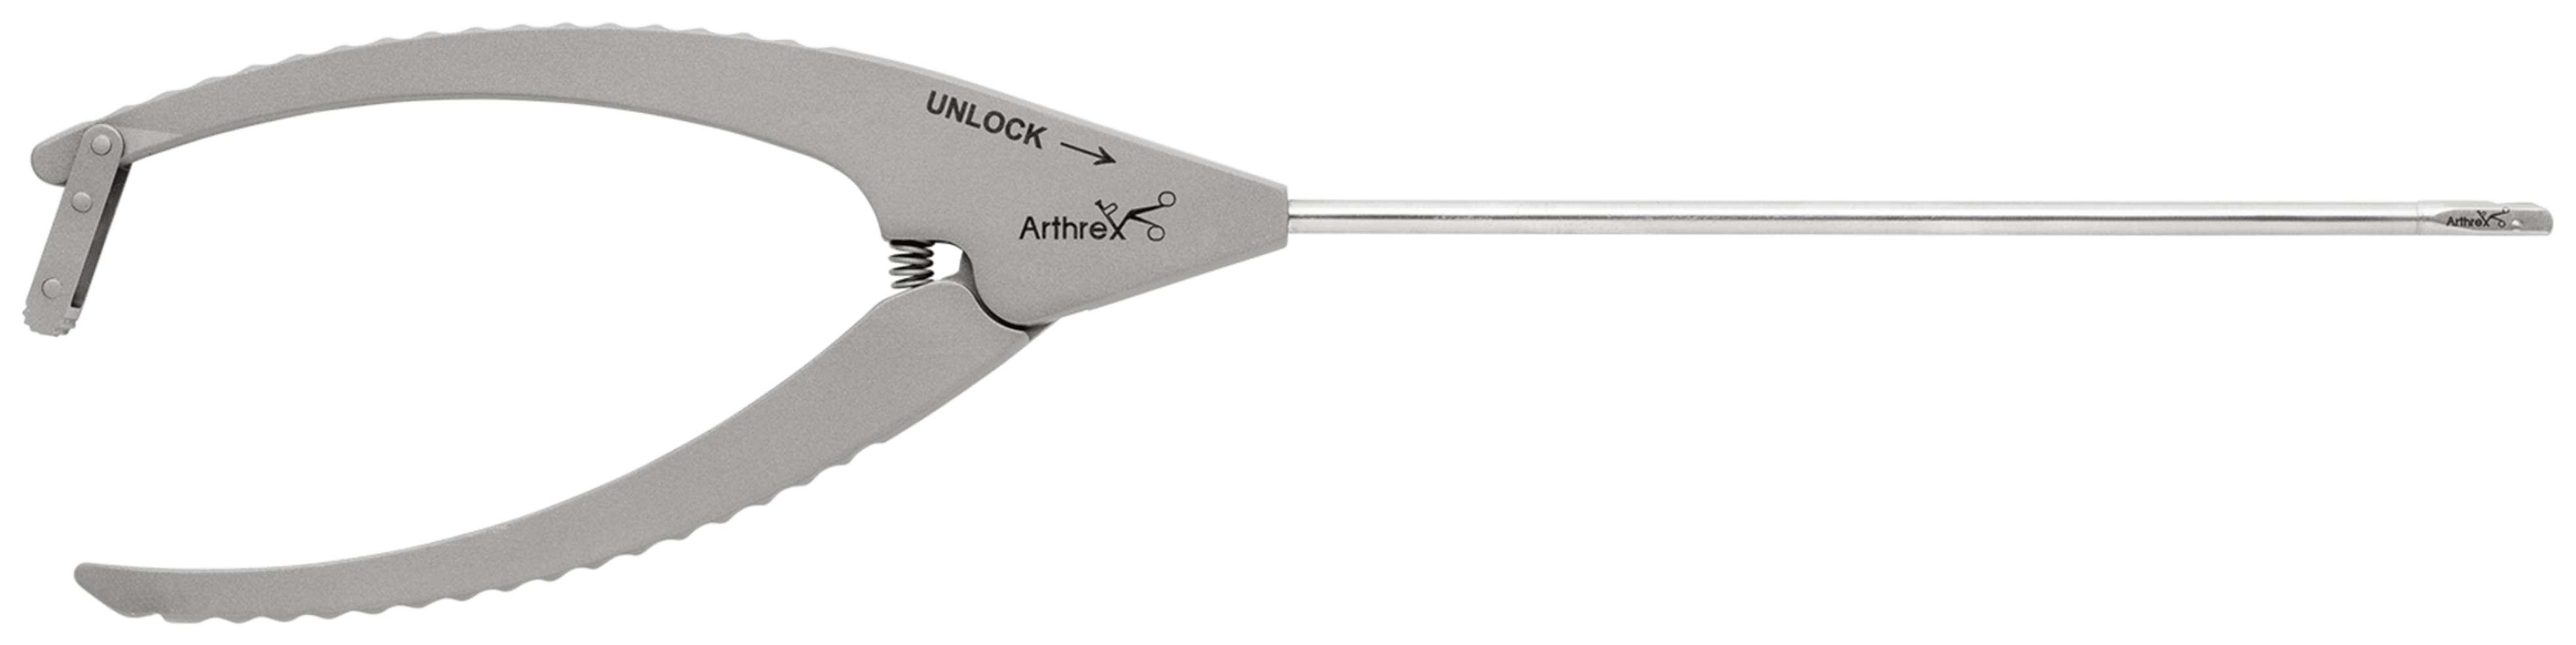 Mini Suture Cutter, 3.4 mm Straight with WishBone Handle (Fits Through Metal Cannula AR-1923MCS)